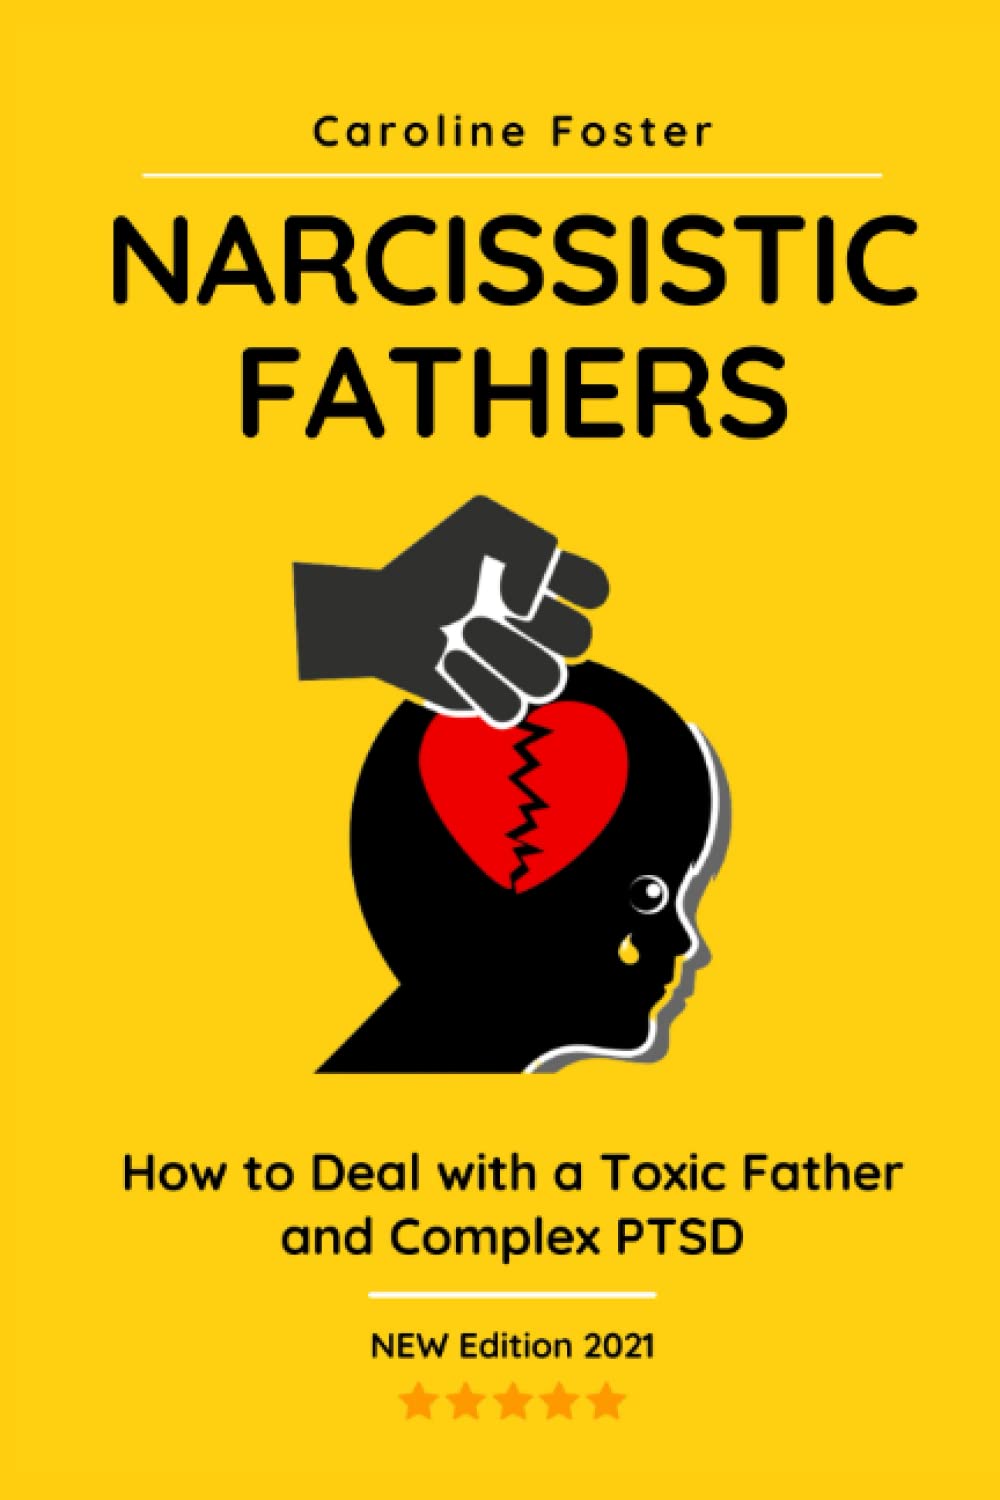 Narcissistic Fathers- How to Deal With a Toxic Father and Complex PTSD